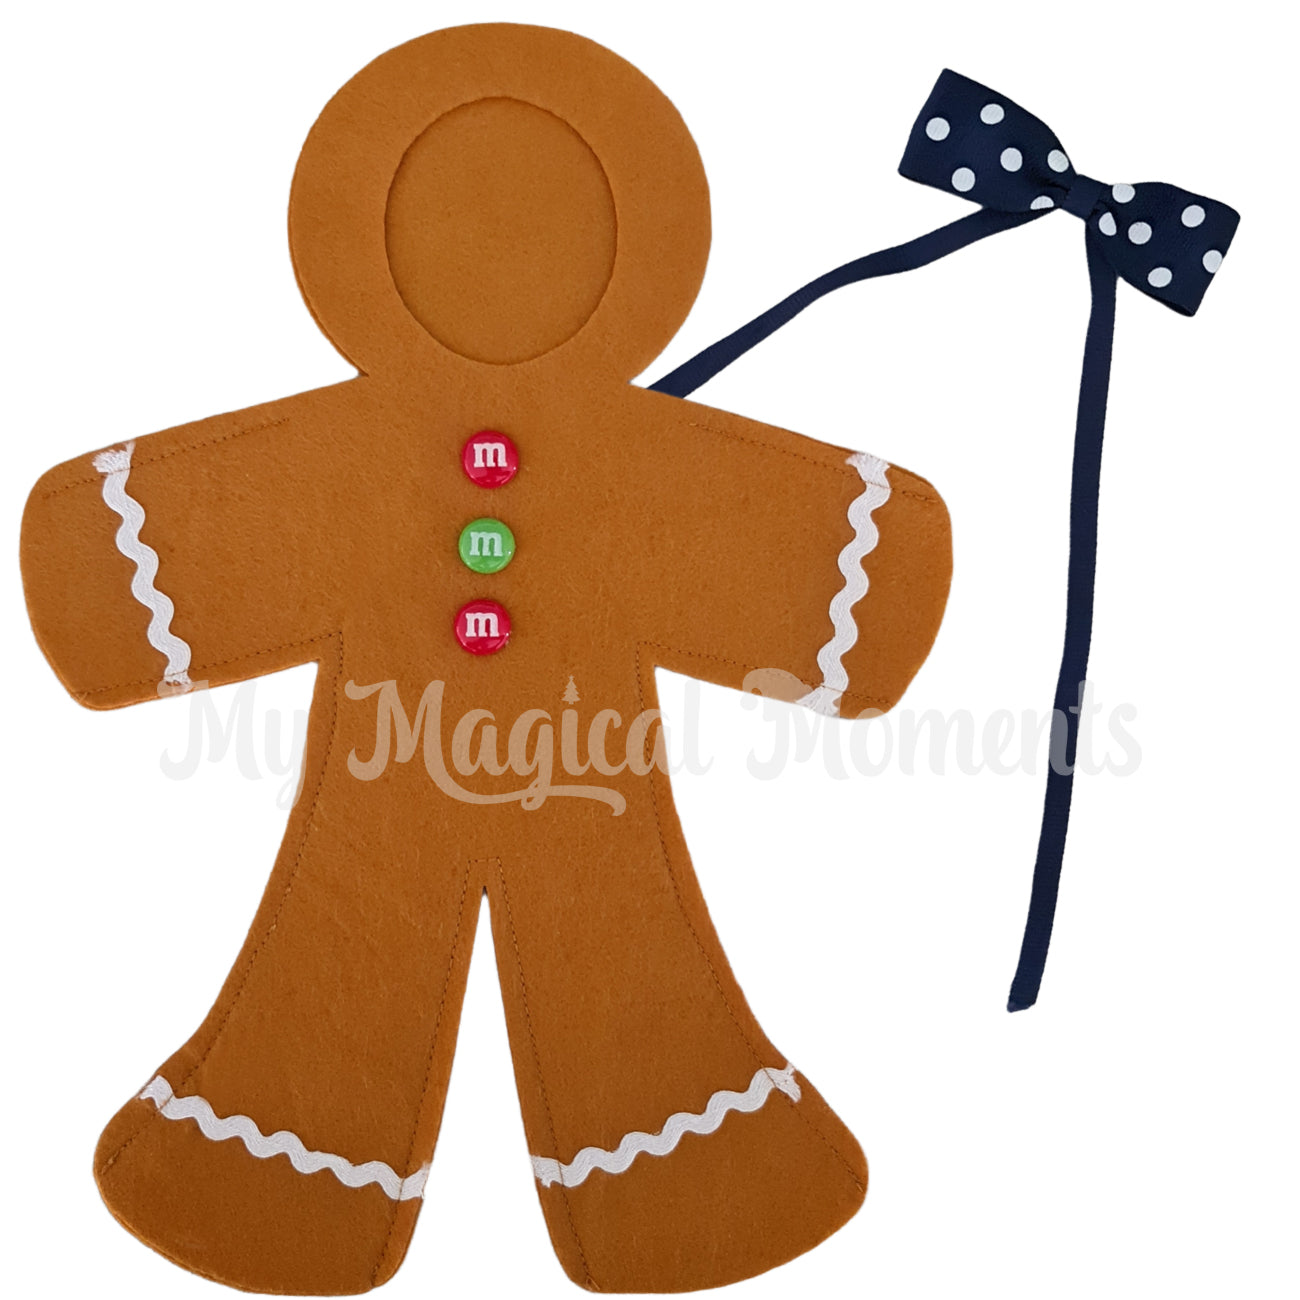 Gingerbread elf costume with m&m buttons and blue and white bow